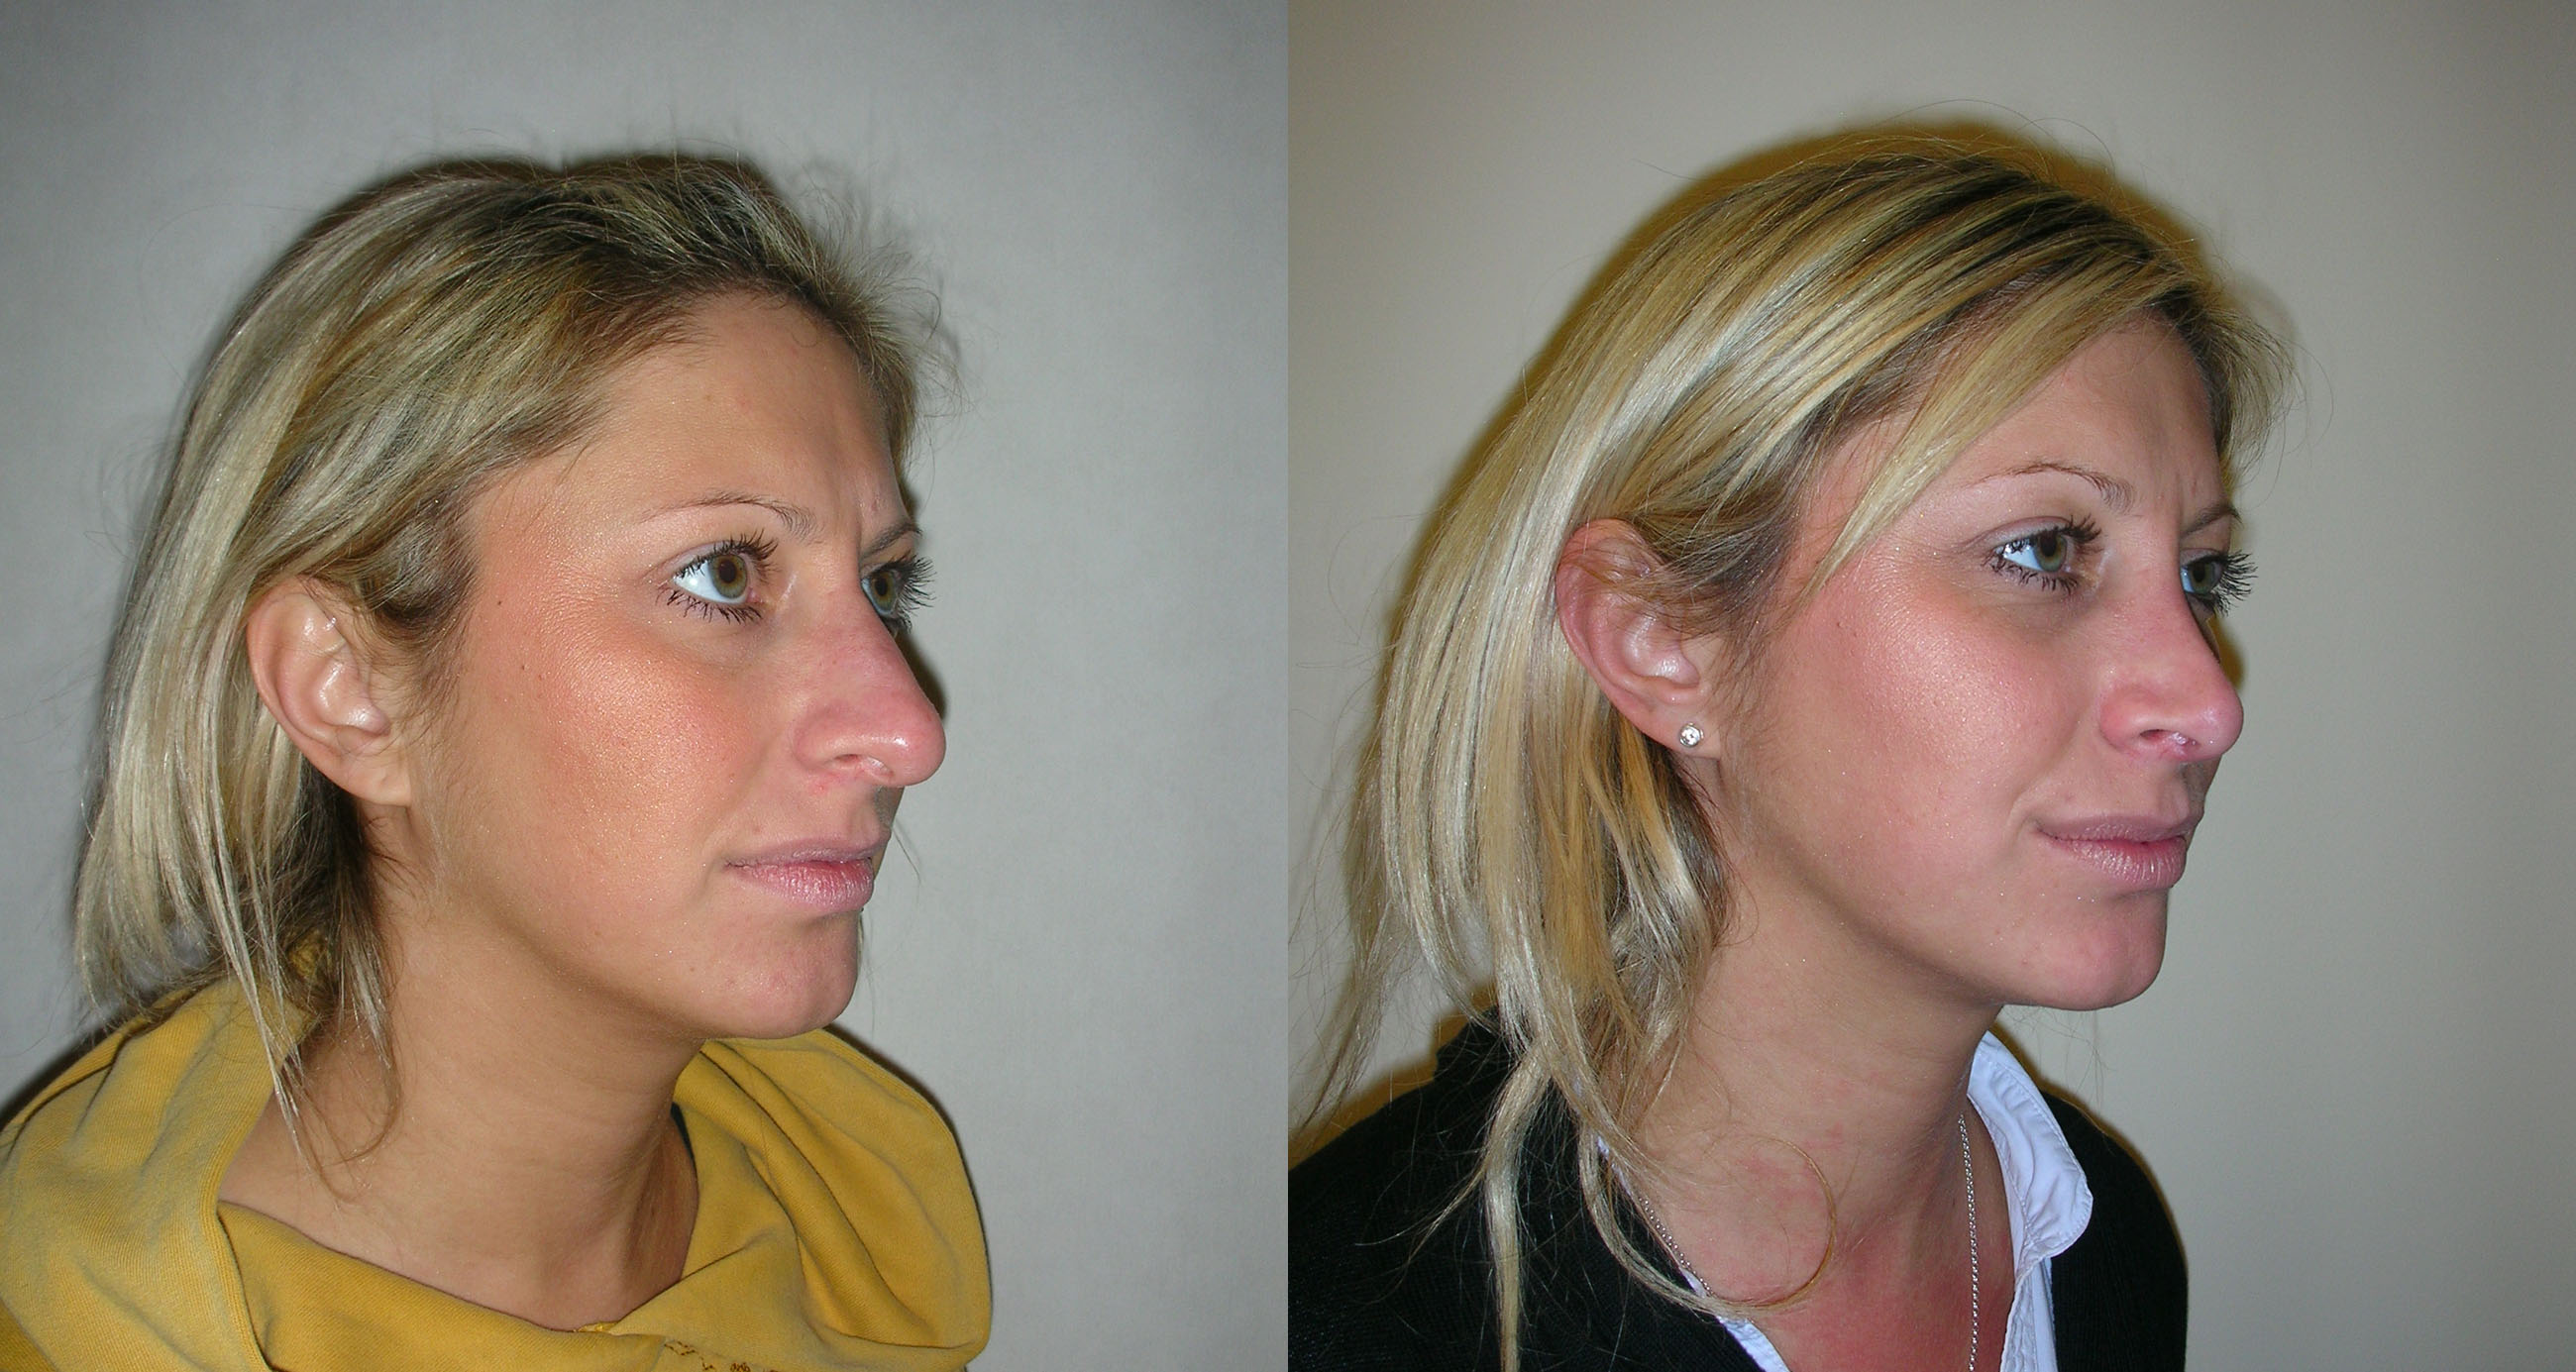 Rhinoplasty / Nose Job surgery in Manchester and London - Waseem Saeed - Plastic Surgeon